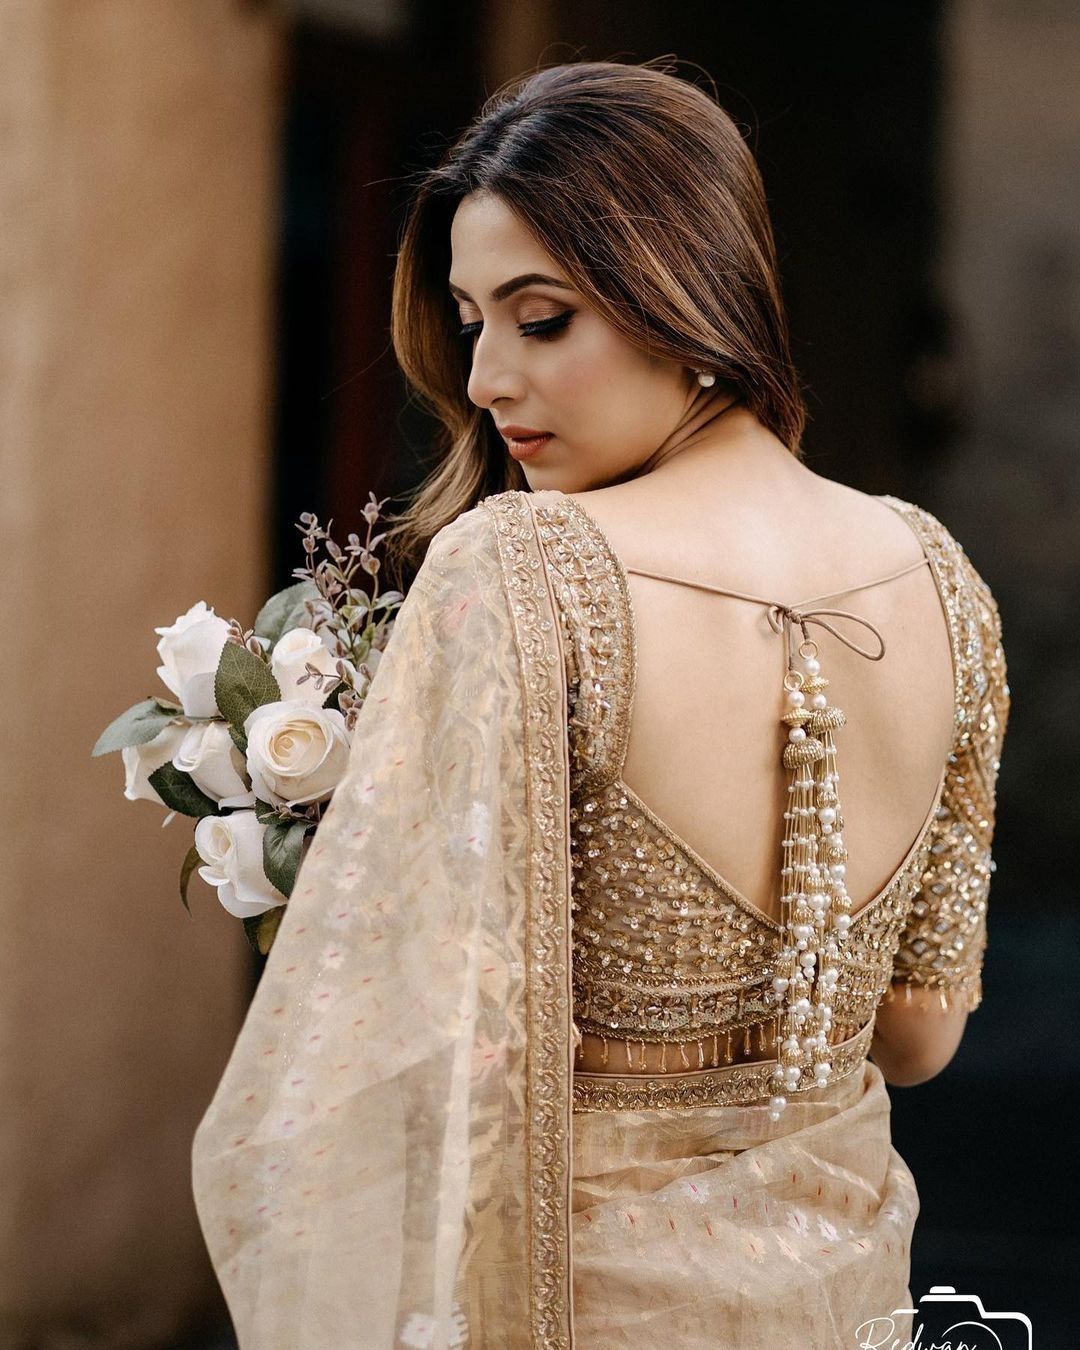 Bridal Blouse Designs: Exquisite Elegance for Your Special Day